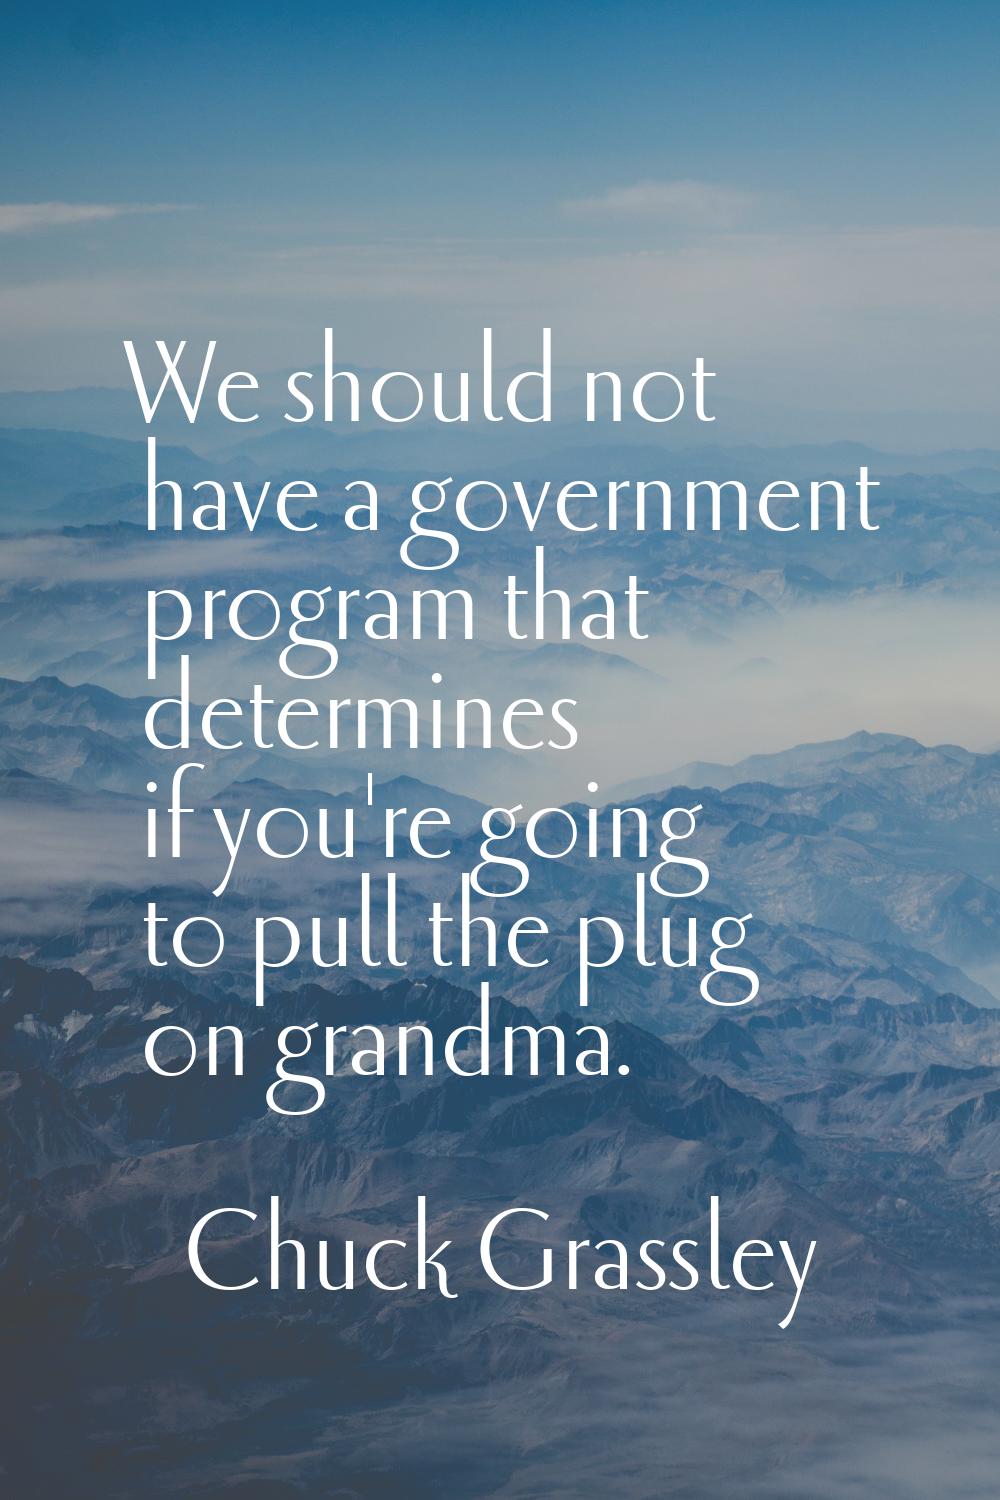 We should not have a government program that determines if you're going to pull the plug on grandma